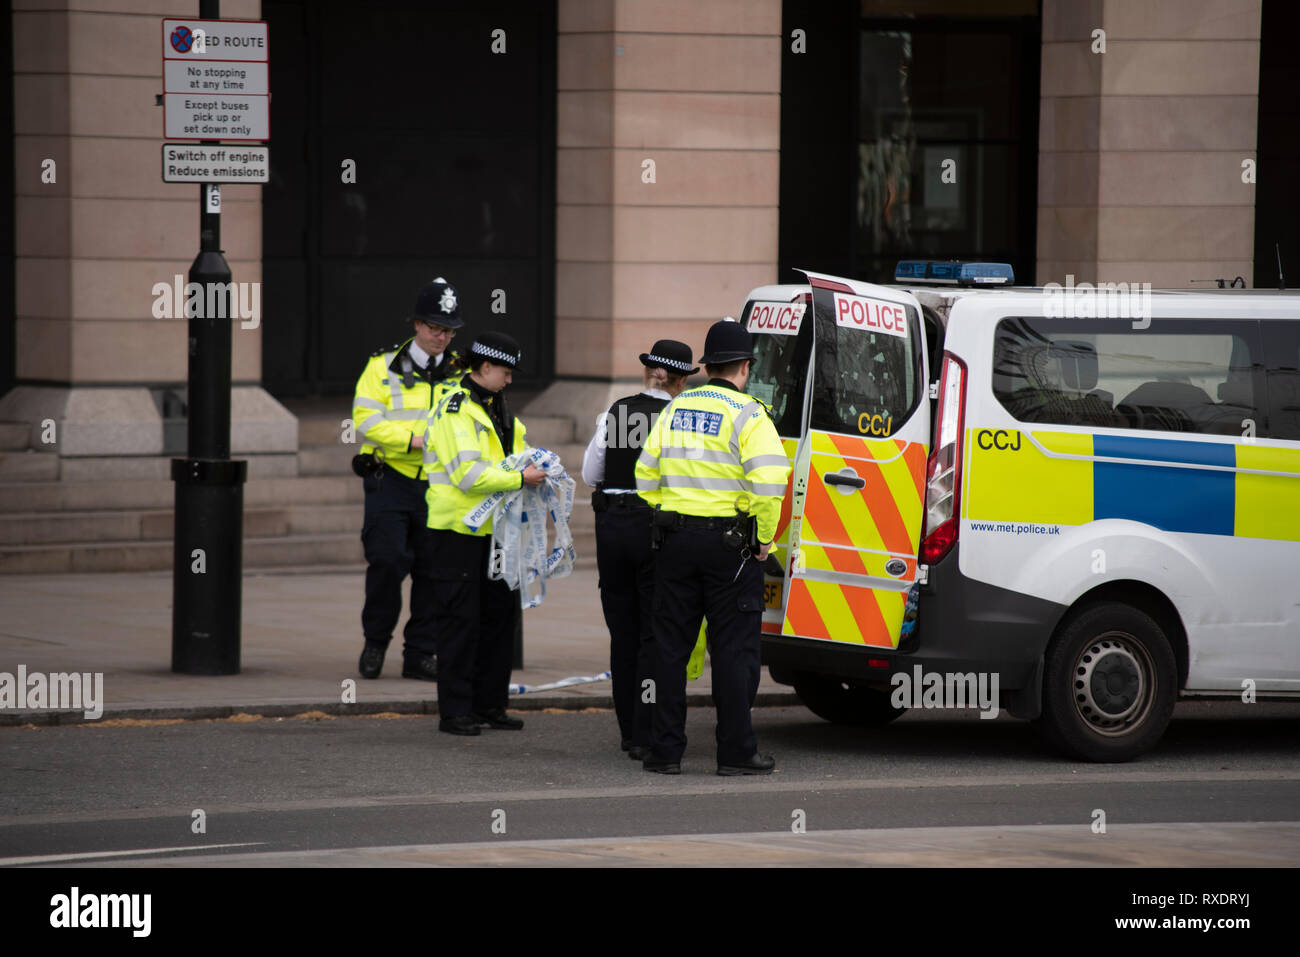 A suspicious car parked outside New Scotland Yard police headquarters on Victoria Embankment, Westminster, London, UK caused the police to lockdown and clear the the area around it and Westminster Bridge, including stopping river traffic on the Thames. Police broke the rear screen of the car to gain entry. Stock Photo